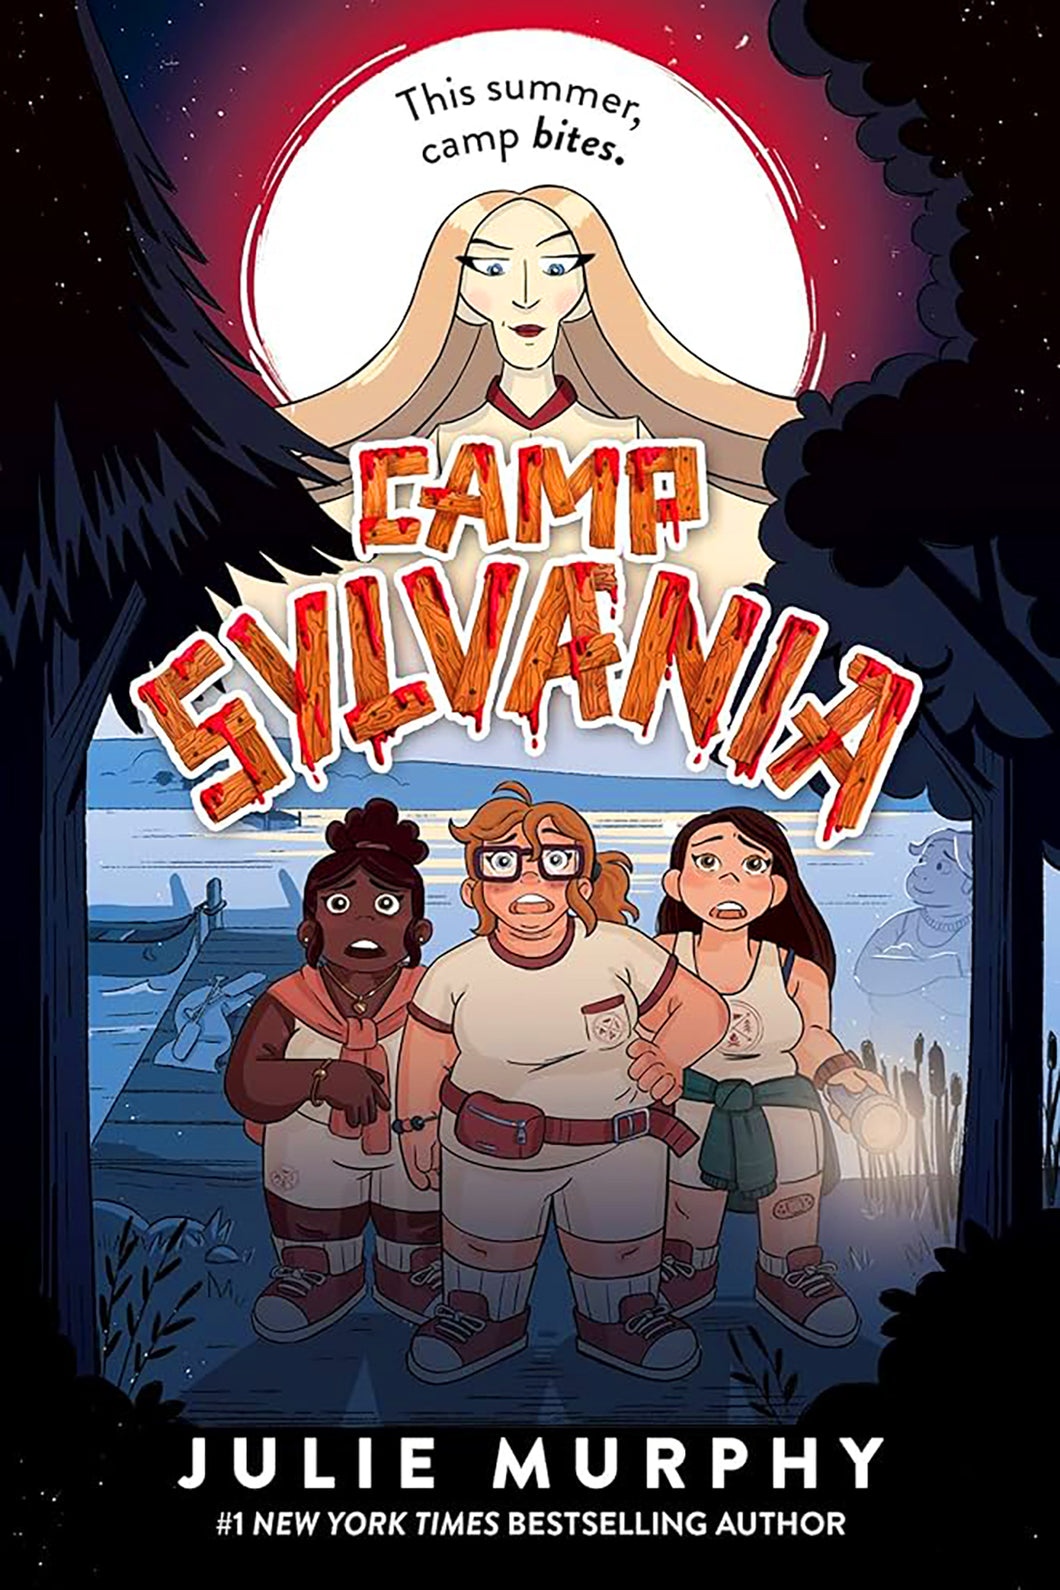 Camp Sylvania by Julie Murphy / Hardcover - NEW BOOK